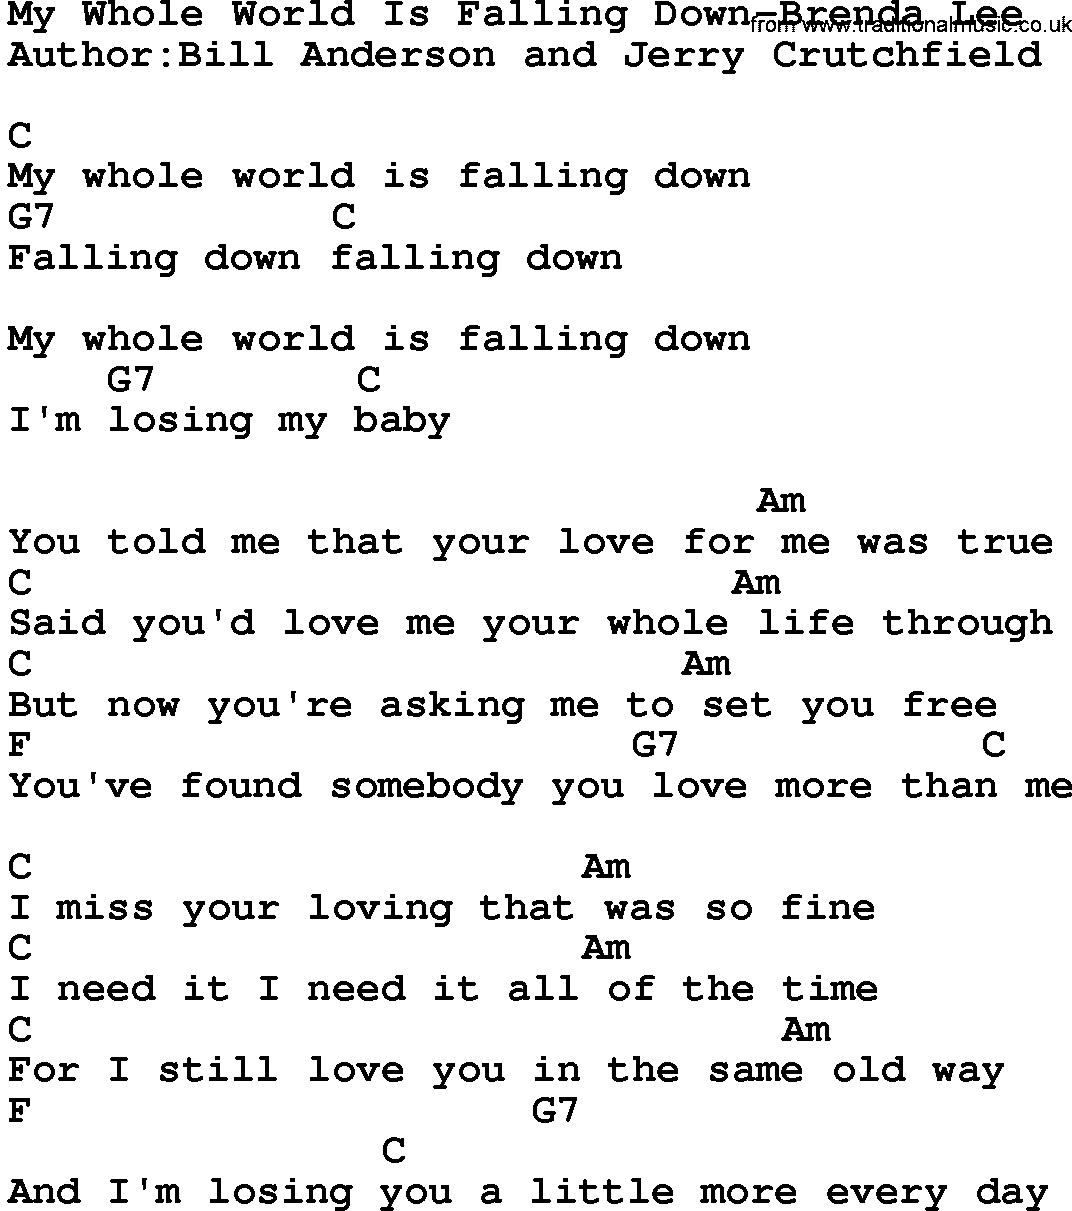 Country music song: My Whole World Is Falling Down-Brenda Lee lyrics and chords